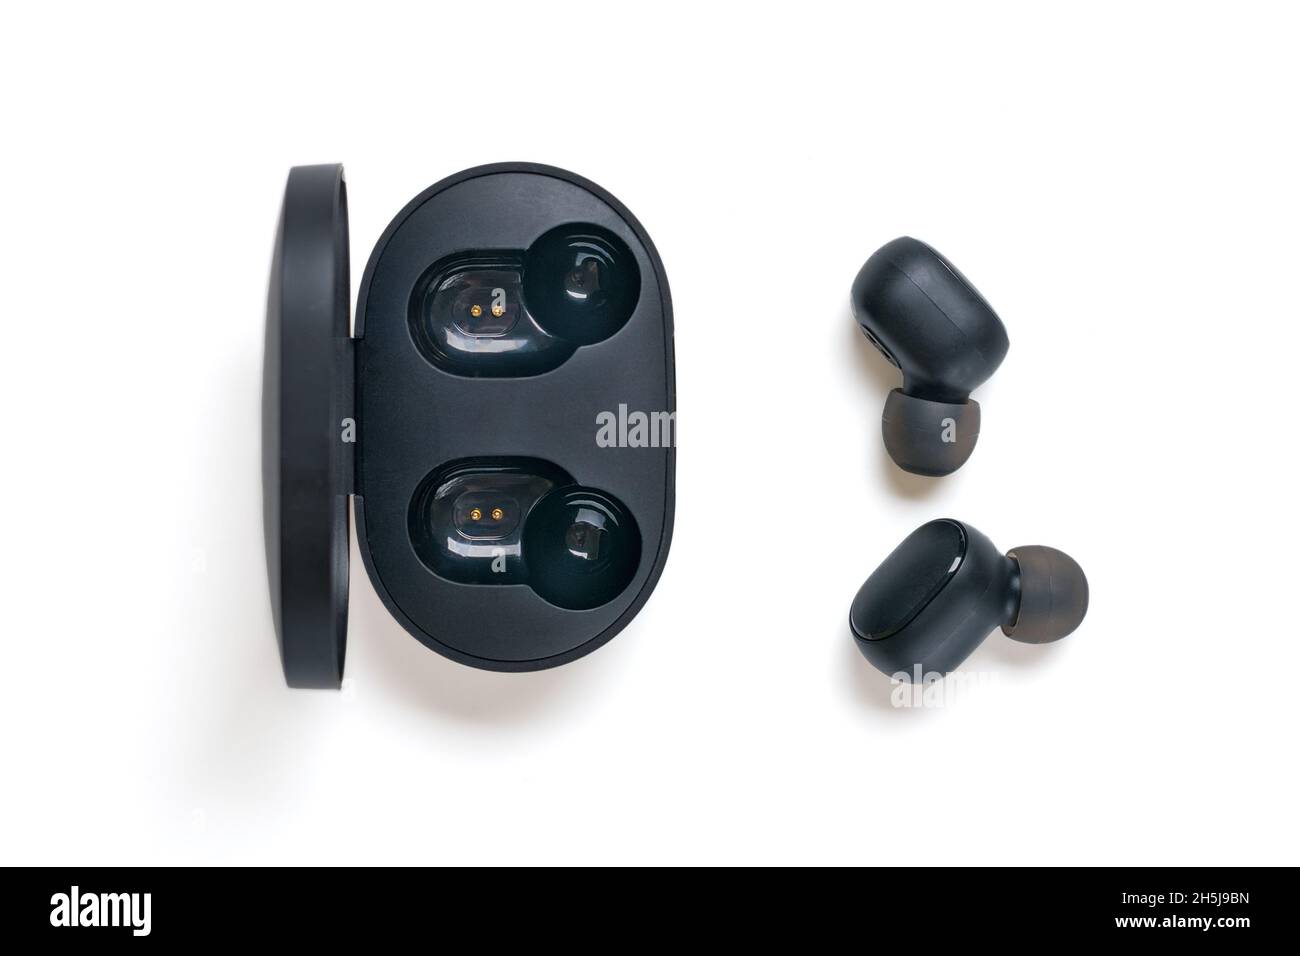 wireless earbuds Can be used for bilateral calls and digital sound quality is assured with its DSP digital noise reduction and capsule on white Stock Photo